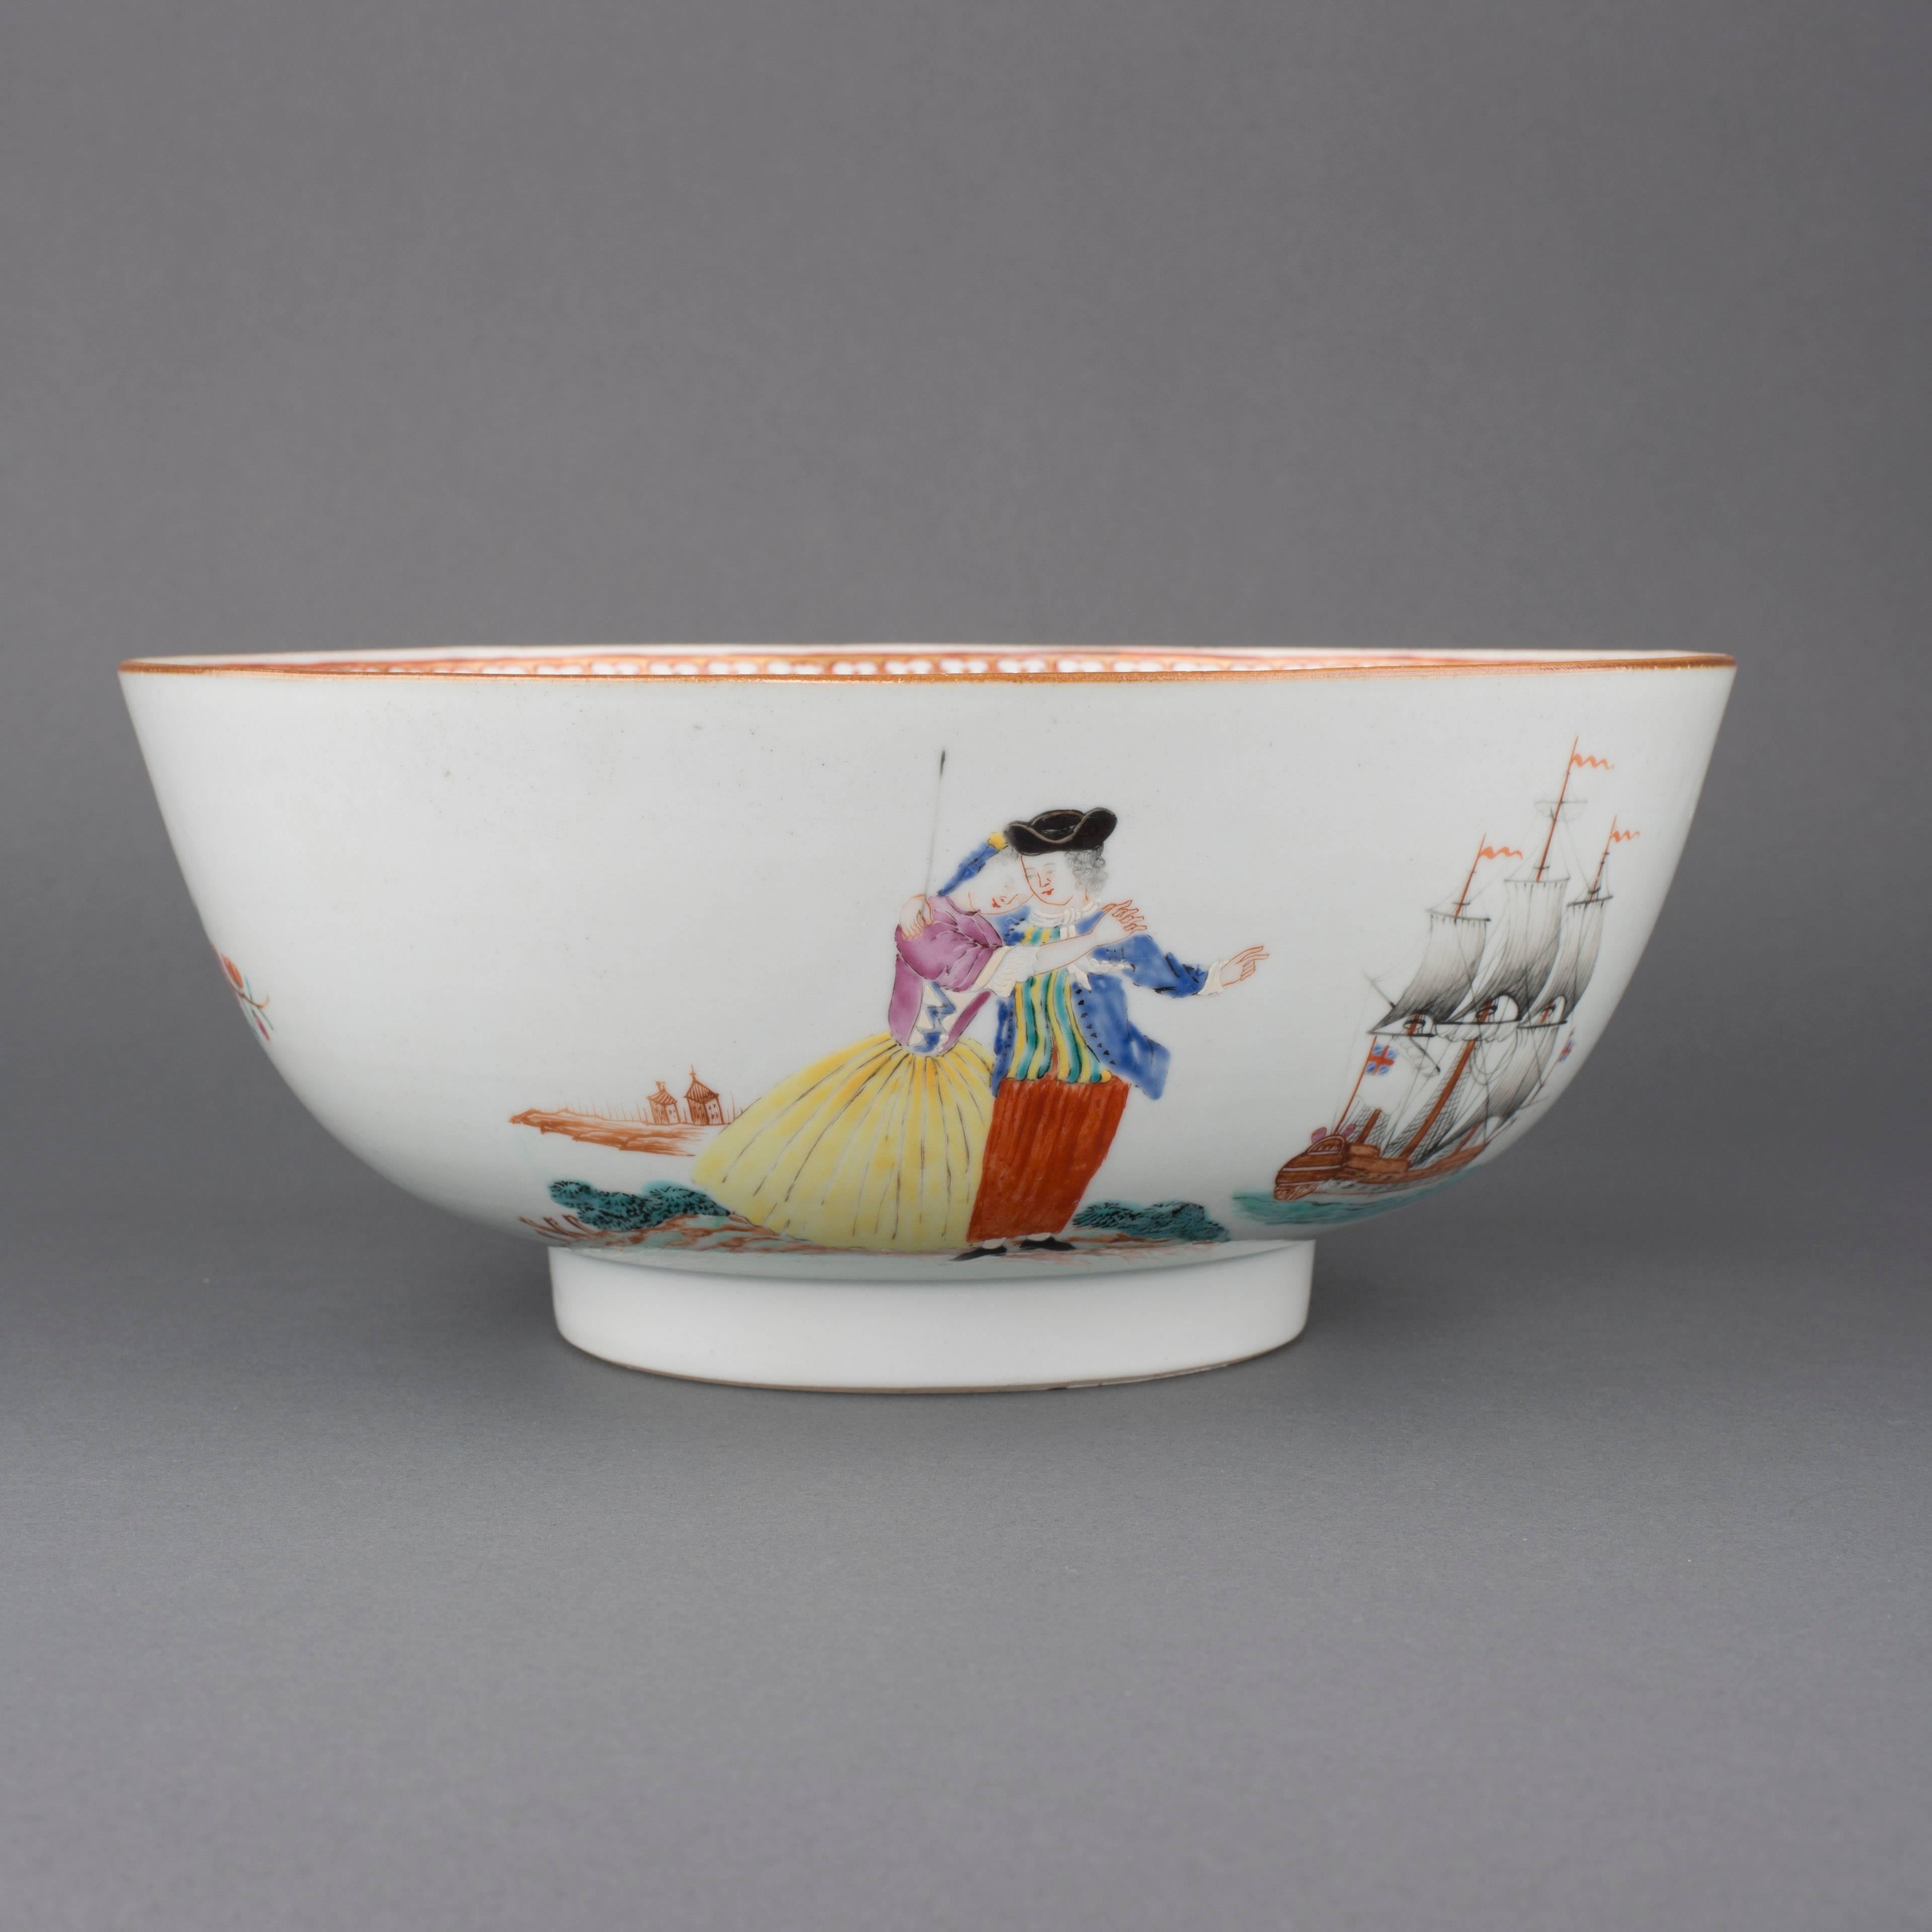 Painted Chinese Export Porcelain Famille Rose Punch Bowl “The Sailor's Farewell”,